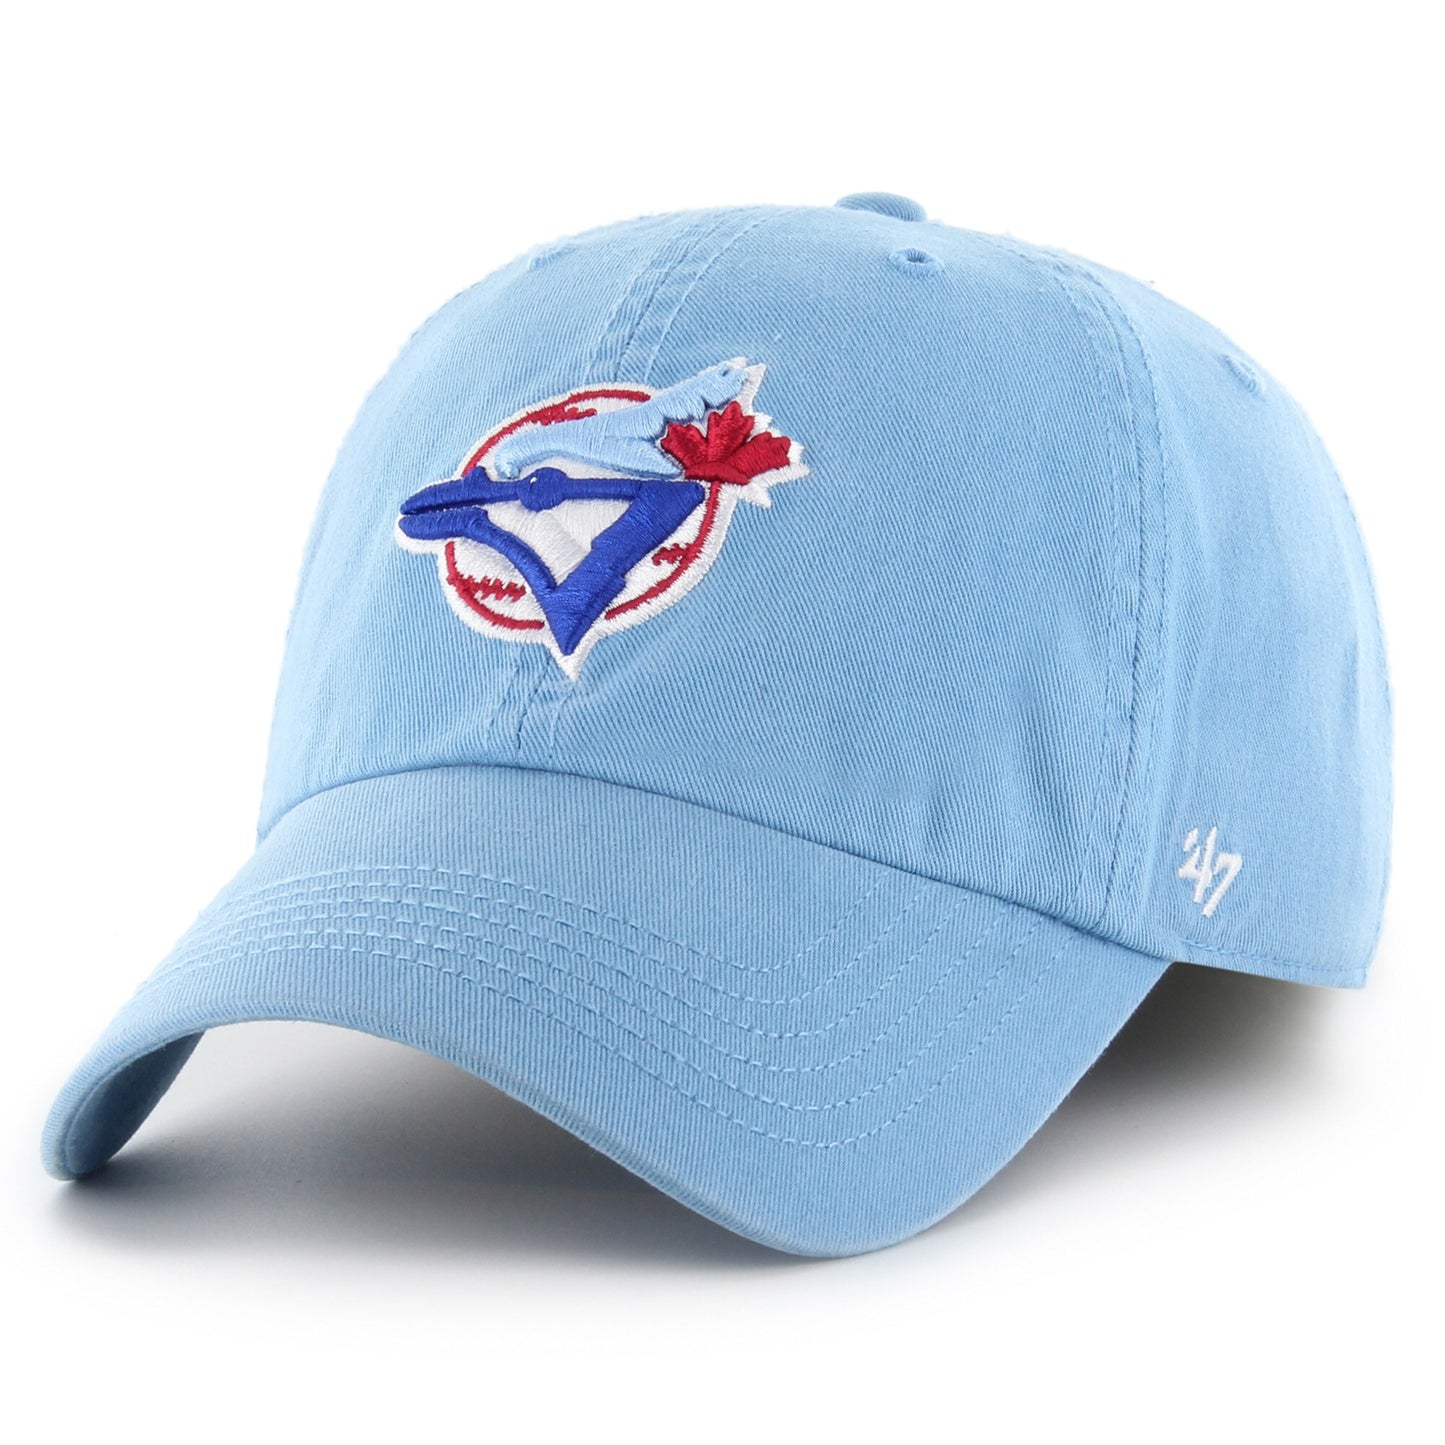 Toronto Blue Jays '47 Cooperstown Collection Franchise Fitted Hat - Light Blue